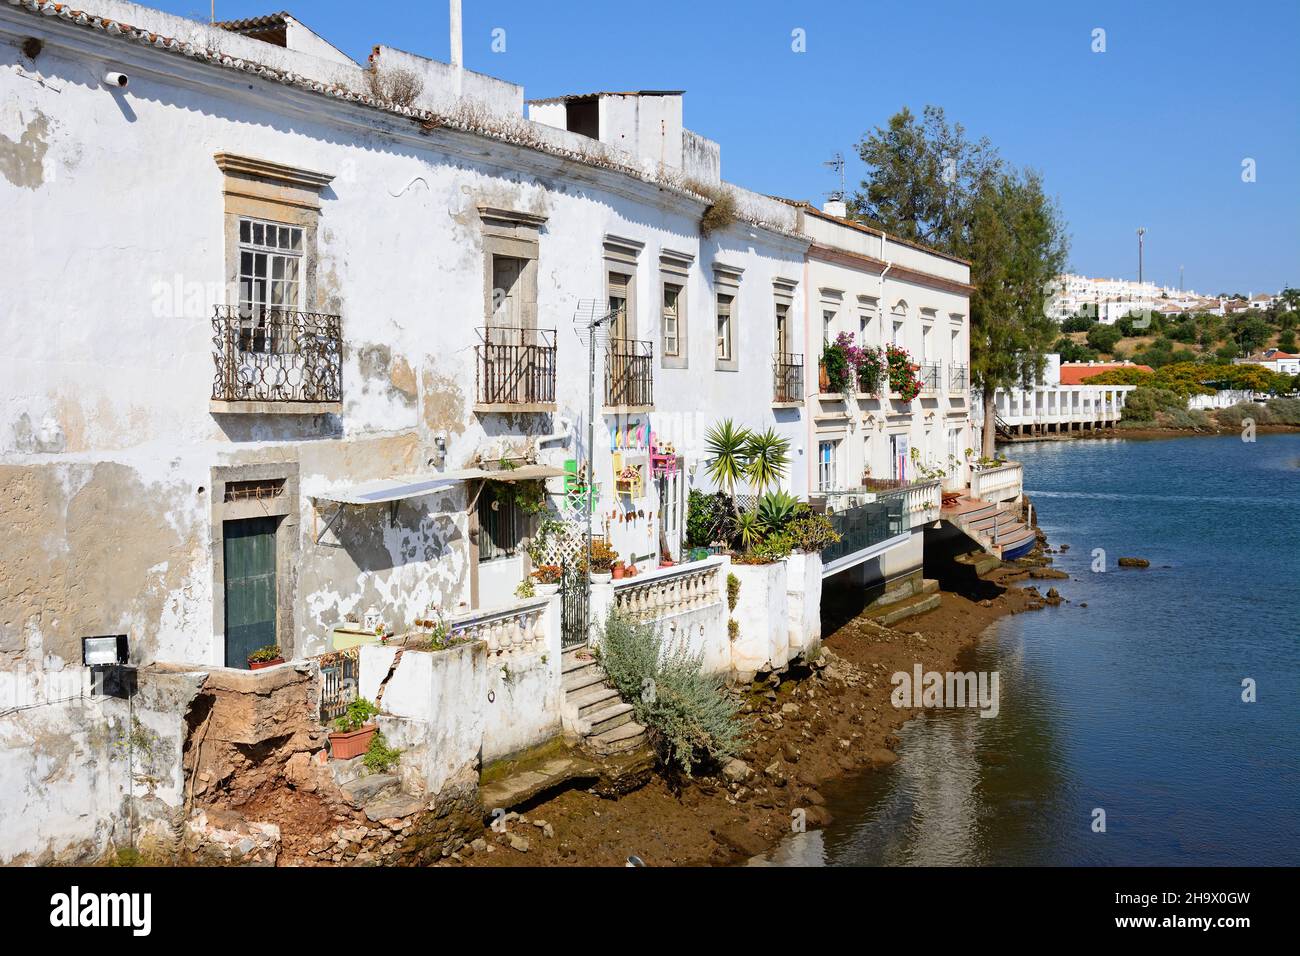 Waterfront townhouses along the riverbank of the Gilao river with steps leading to the water, Tavira, Algarve, Portugal, Europe. Stock Photo